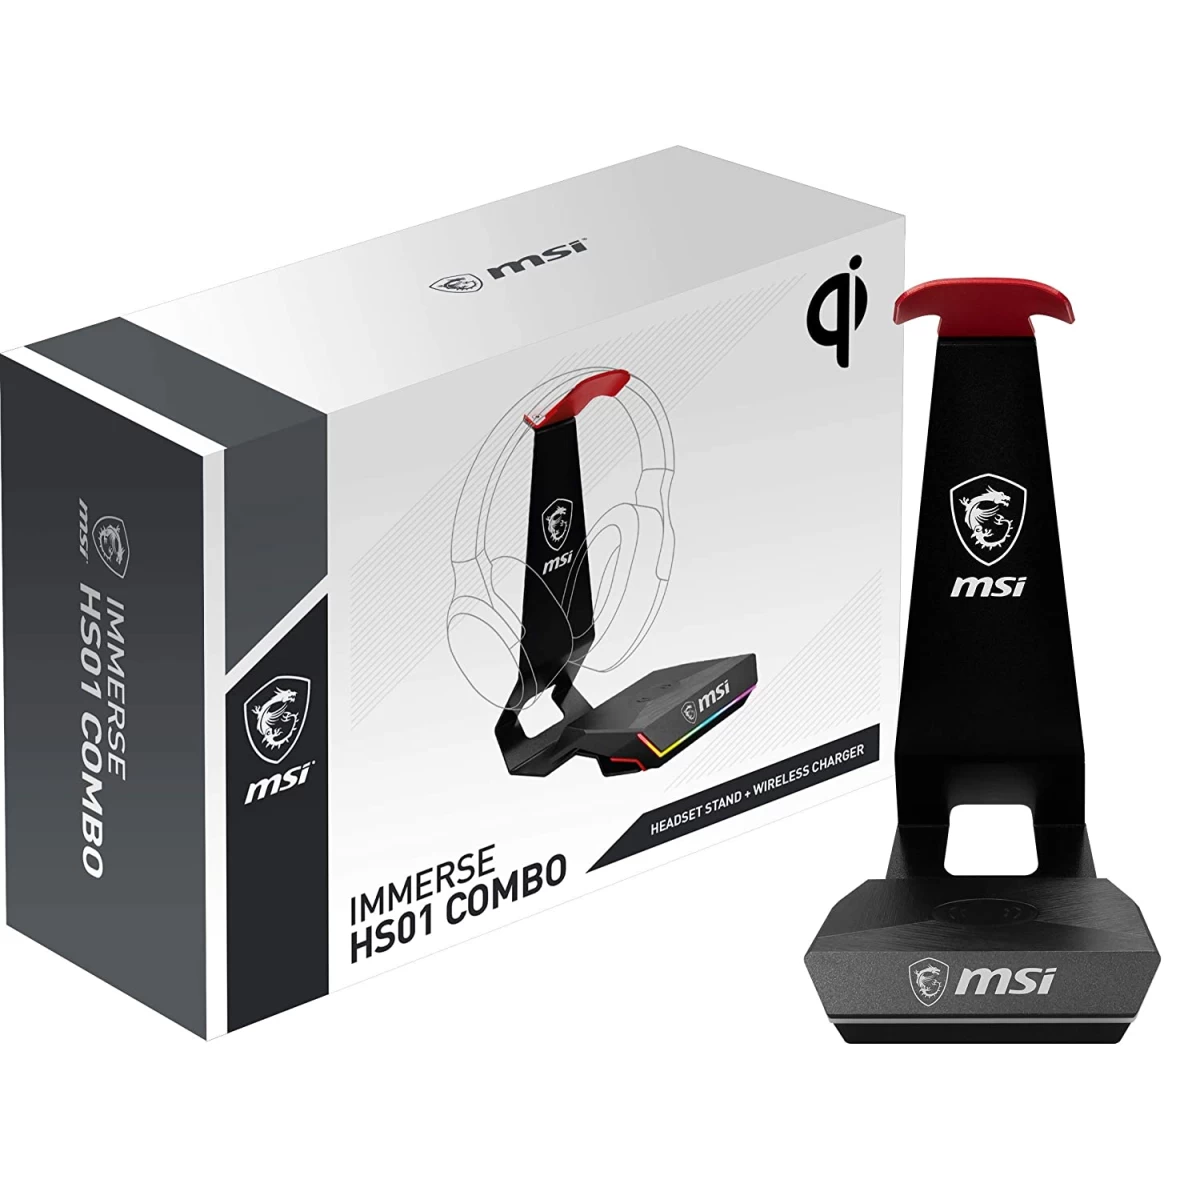 MSI IMMERSE HS01 COMBO Qi Charger & Headset Stand